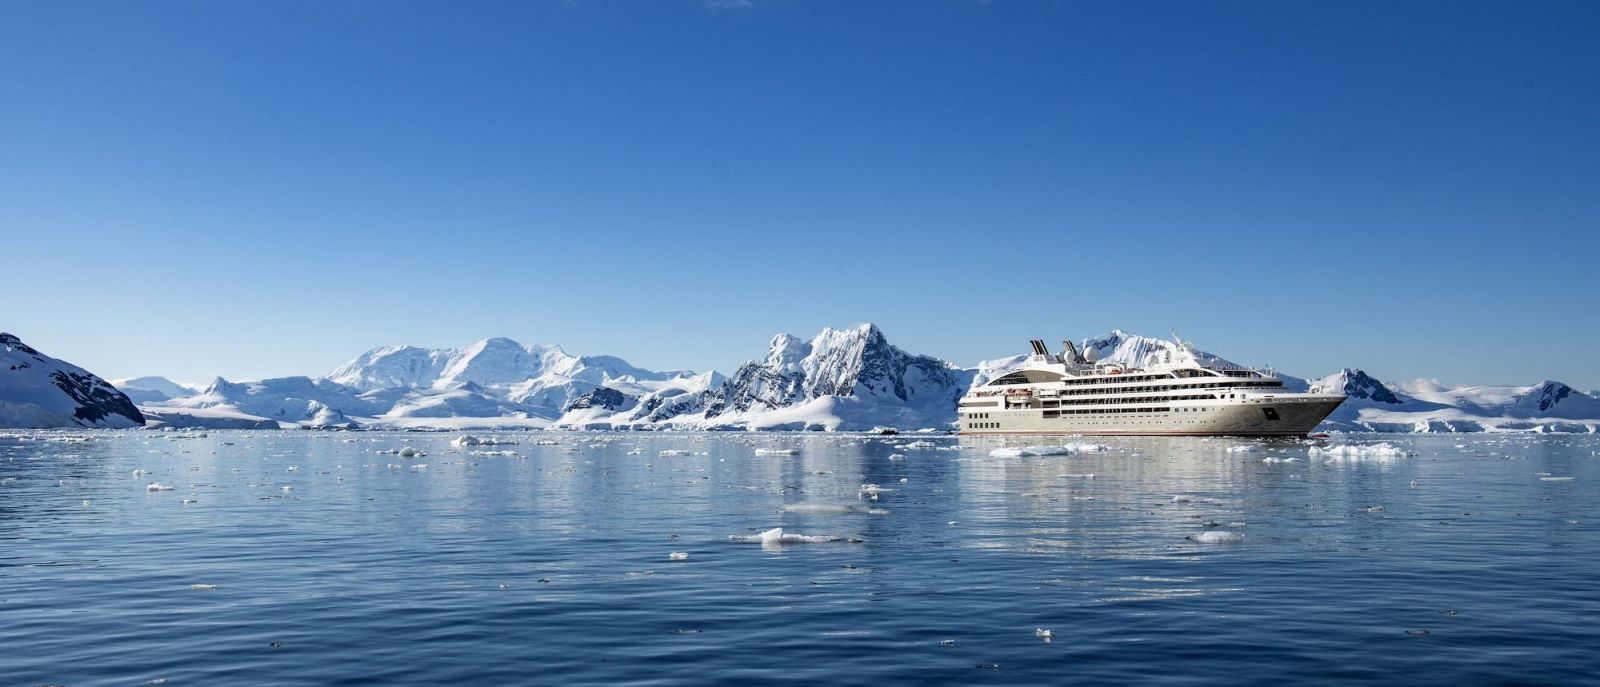 Adventures By Disney Is Planning A Luxury Expedition Cruise To Antarctica